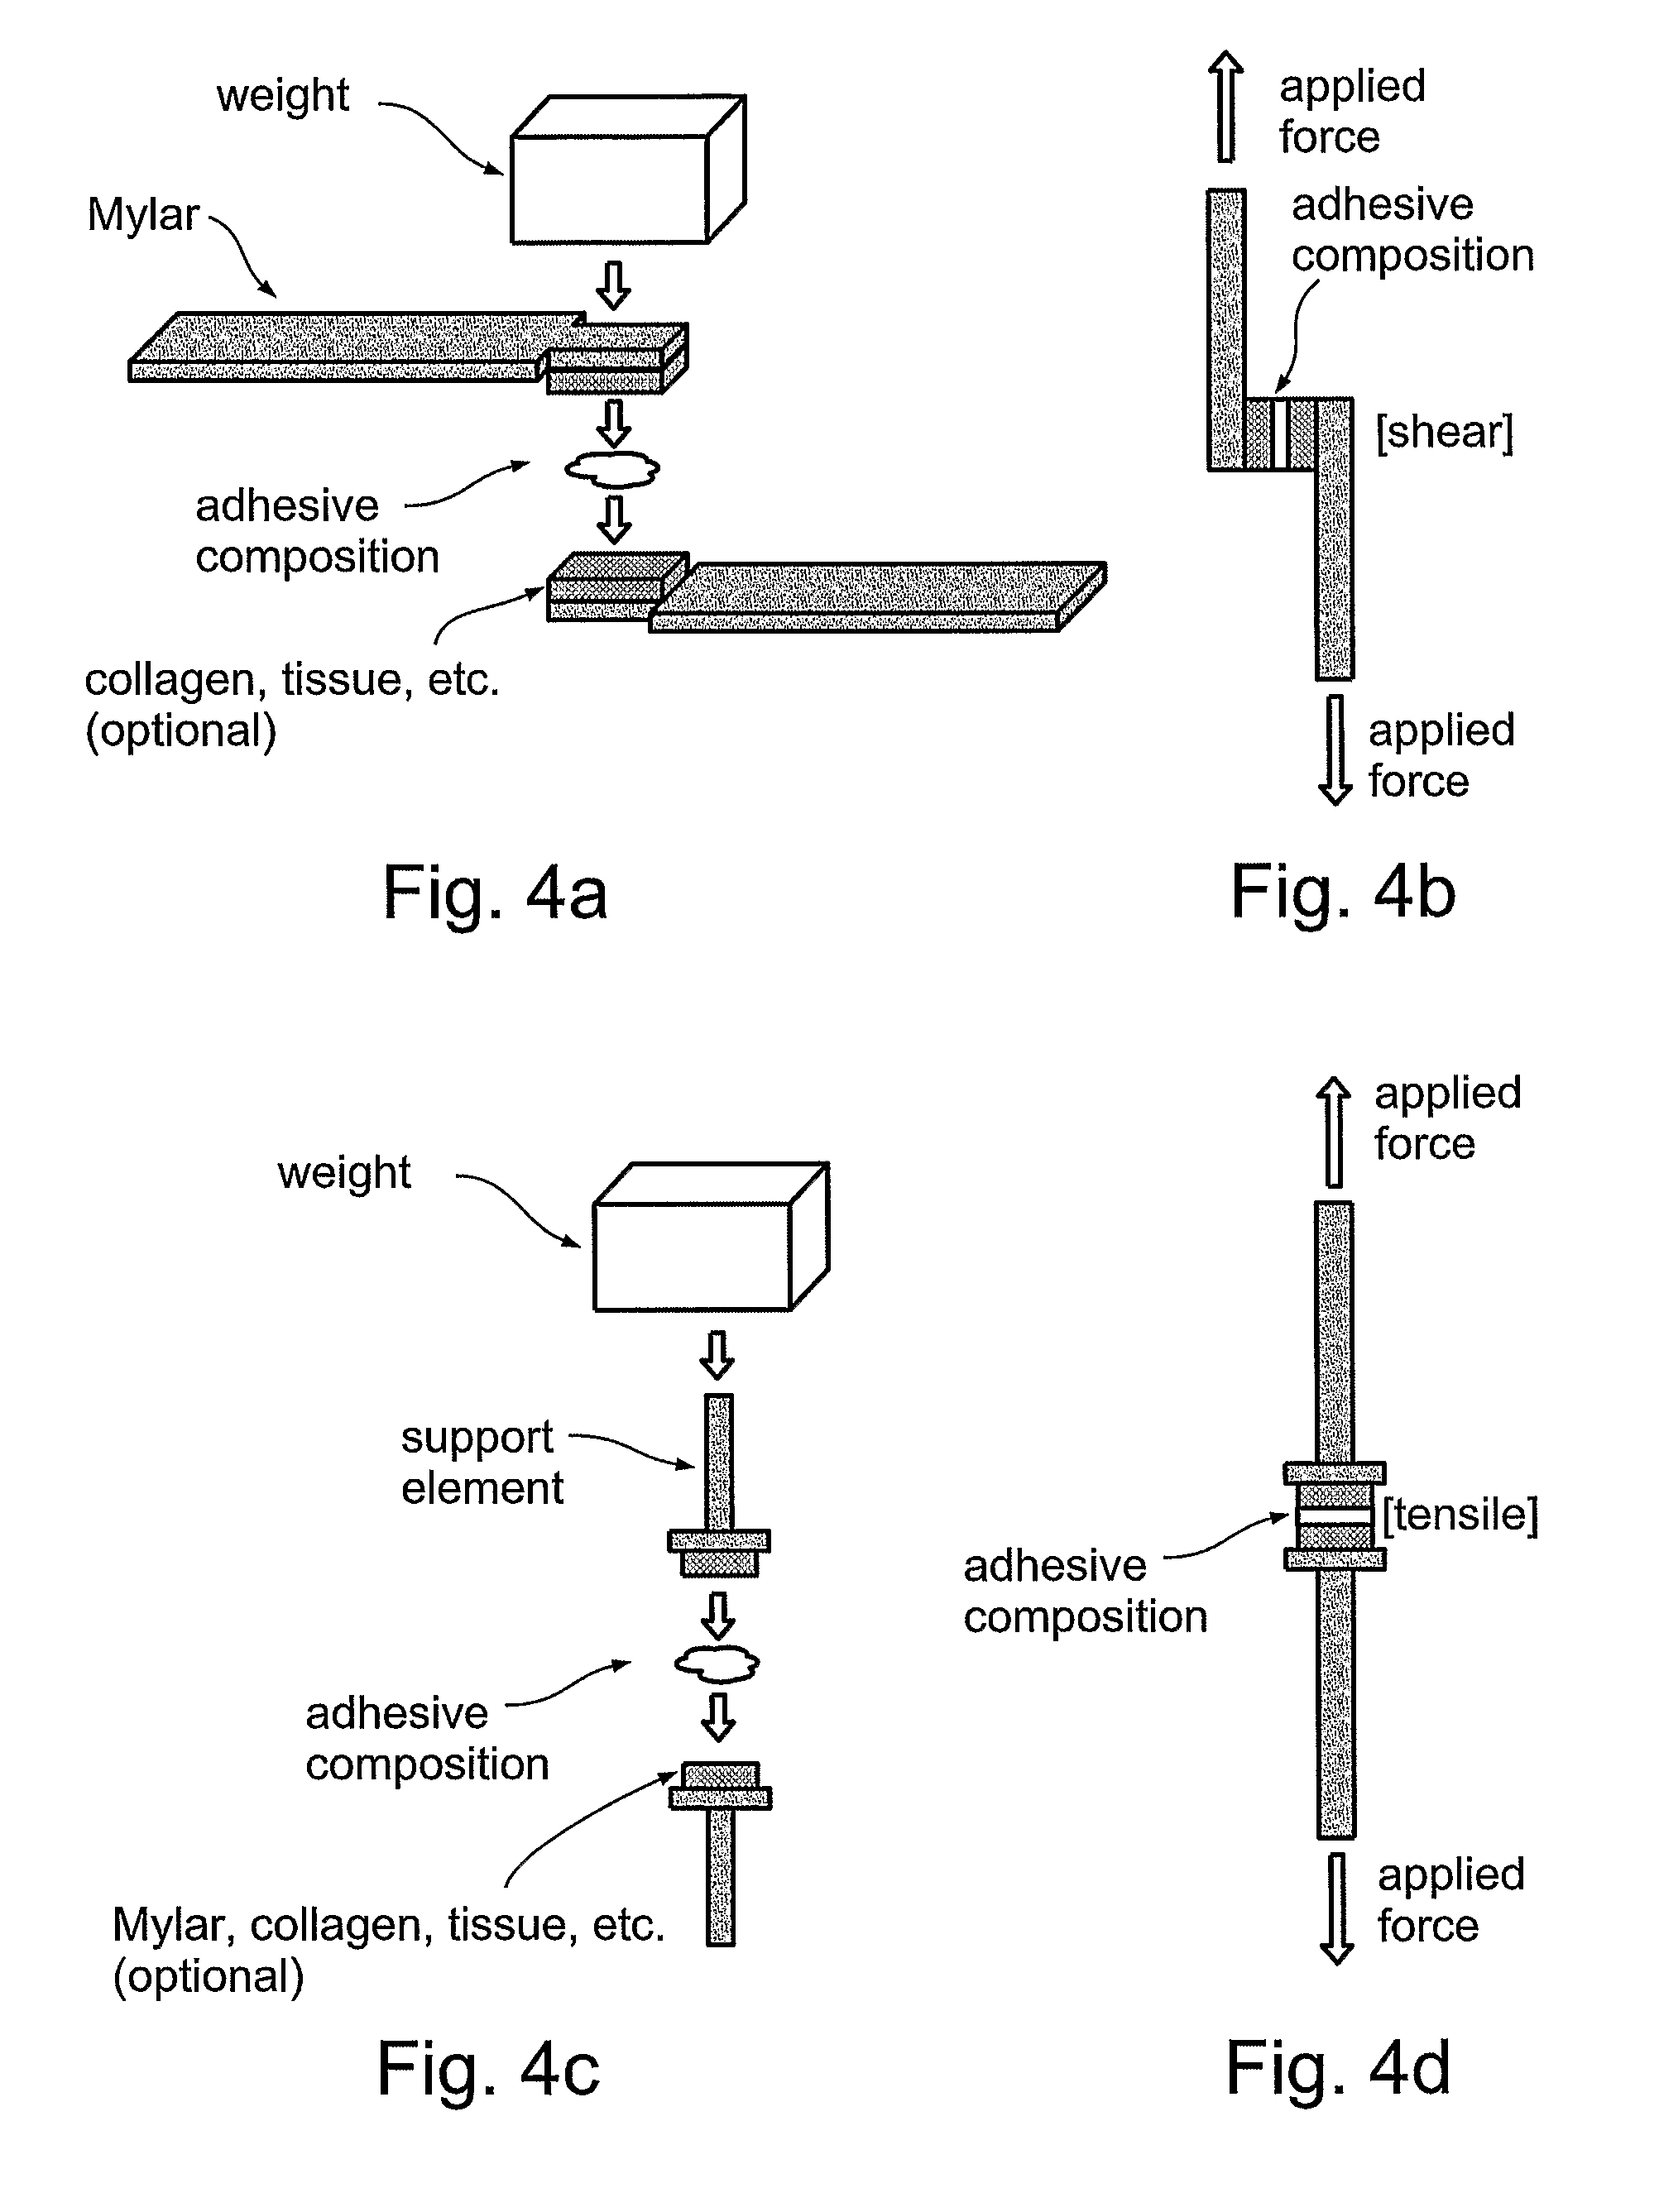 Novel Adhesive Materials, Manufacturing Thereof, and Applications Thereof